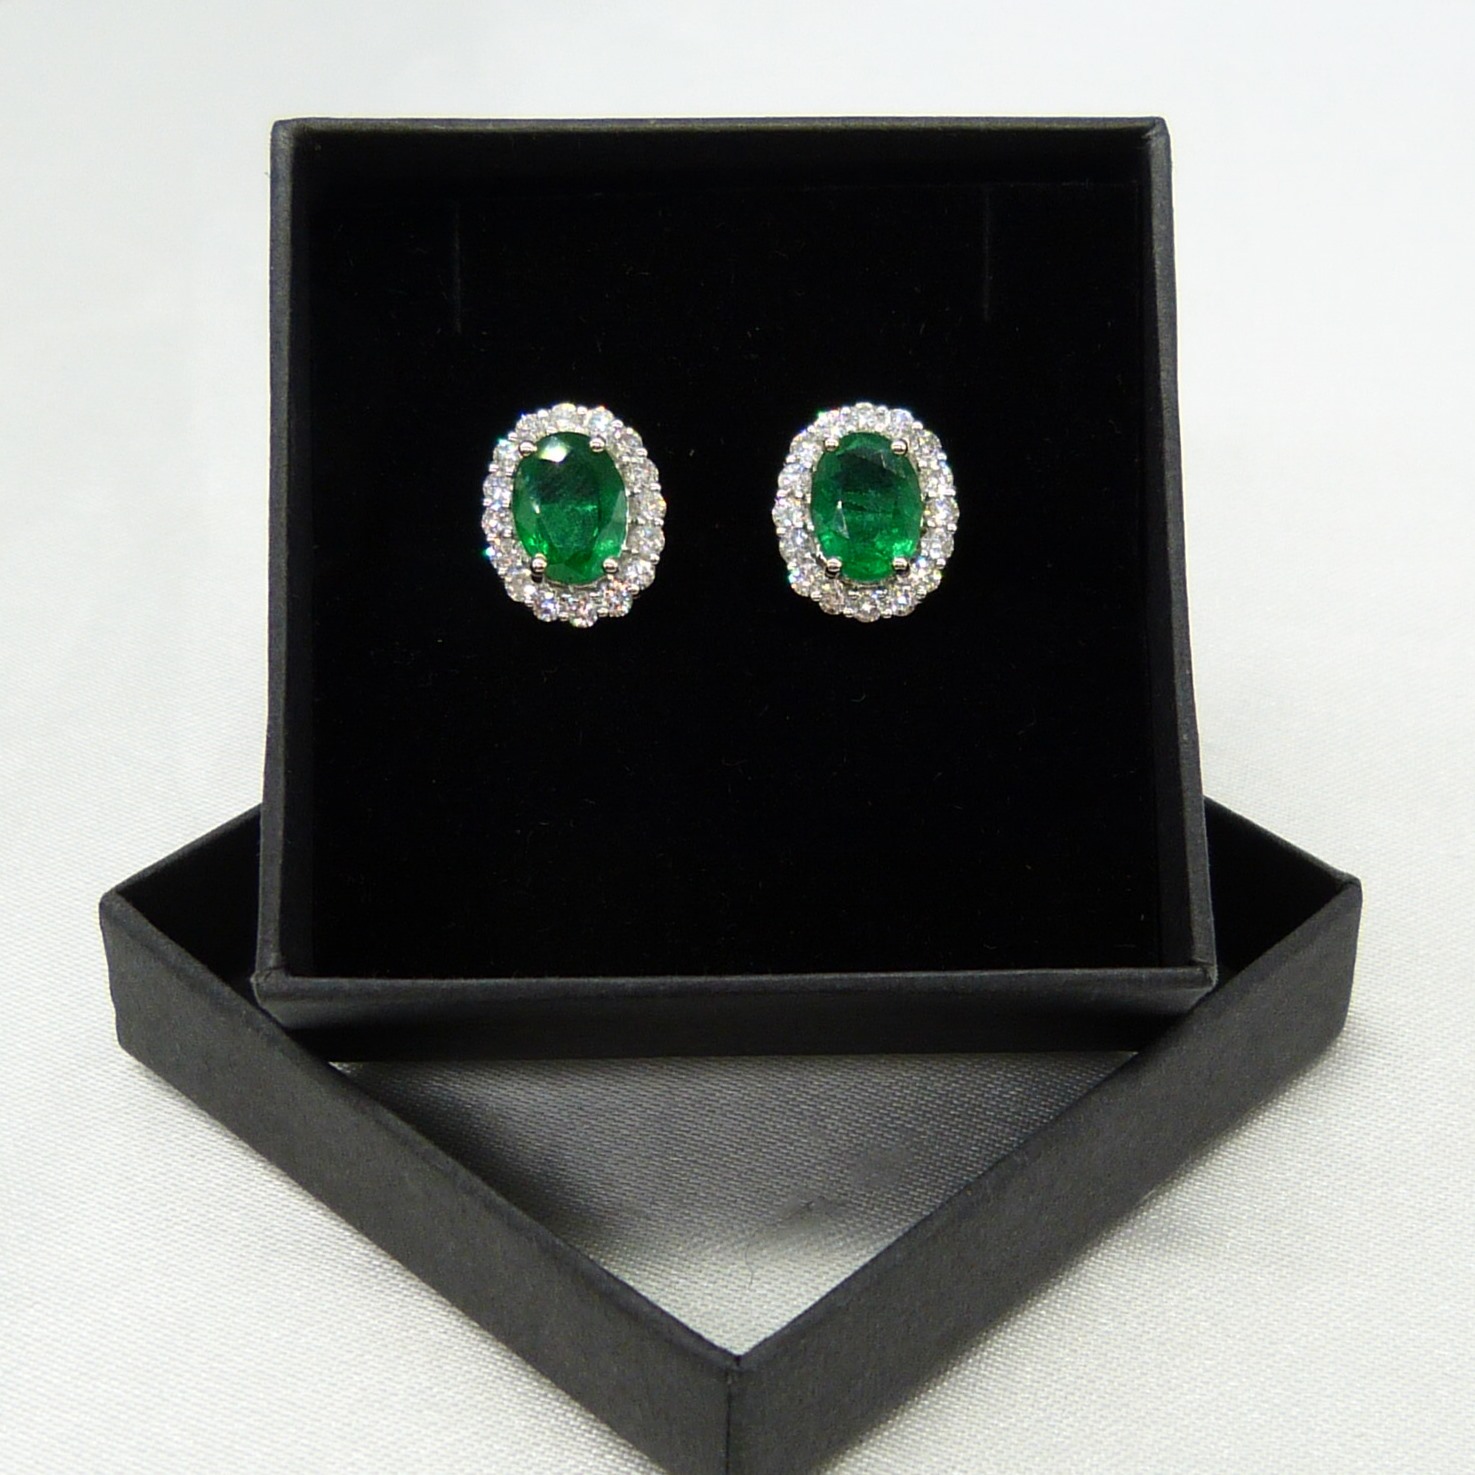 Pair of 18ct white gold 2.48 carat emerald and diamond halo ear studs, boxed - Image 2 of 8